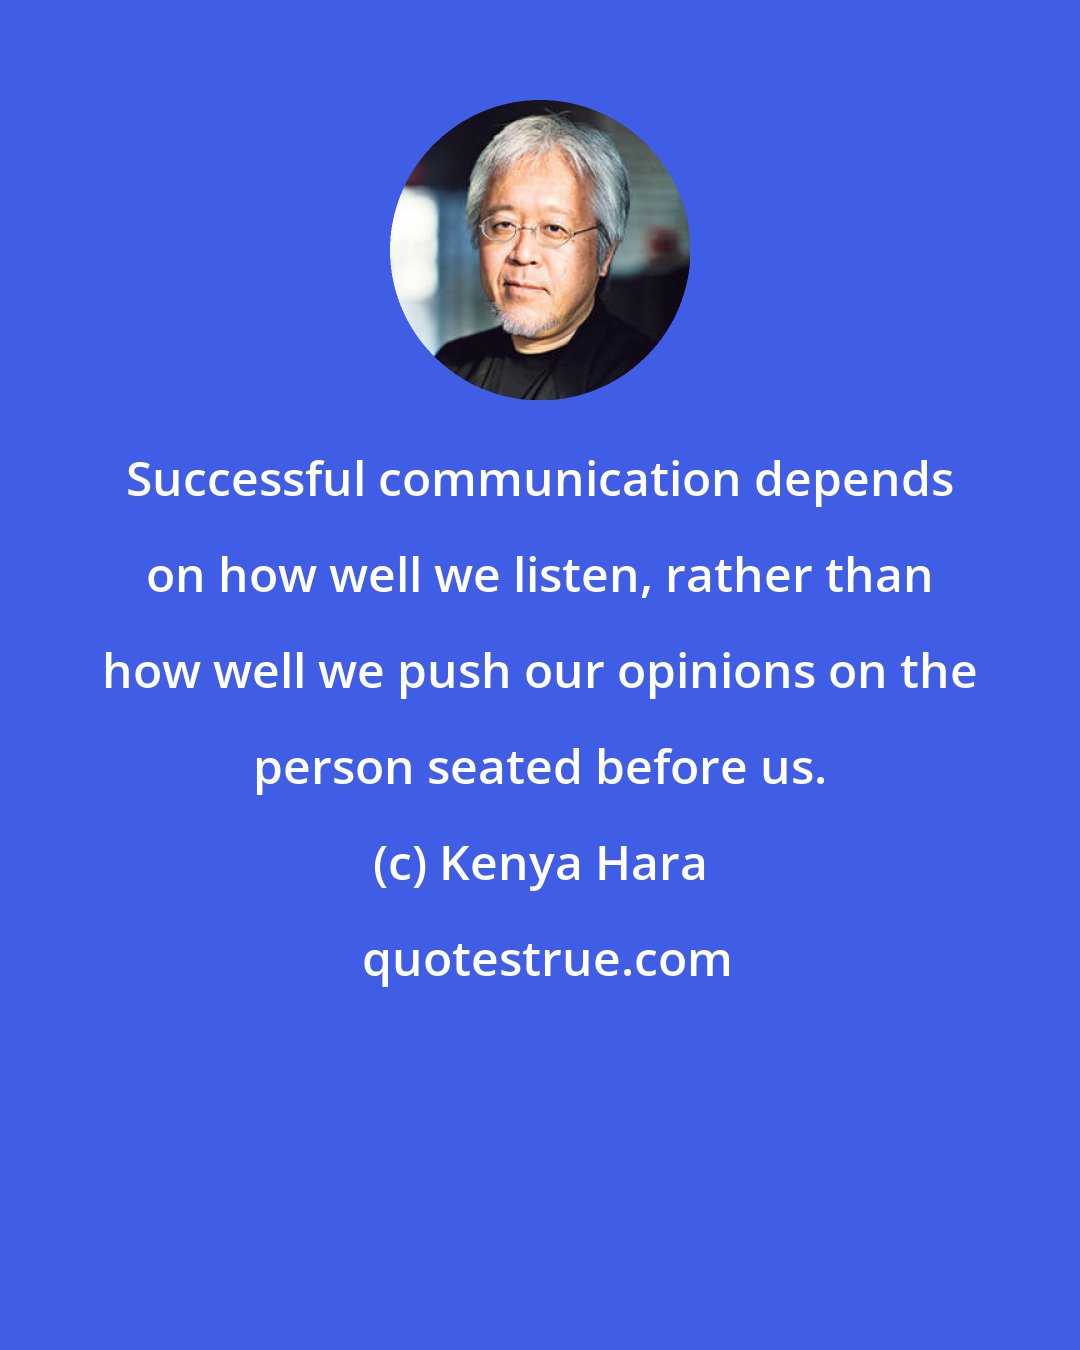 Kenya Hara: Successful communication depends on how well we listen, rather than how well we push our opinions on the person seated before us.